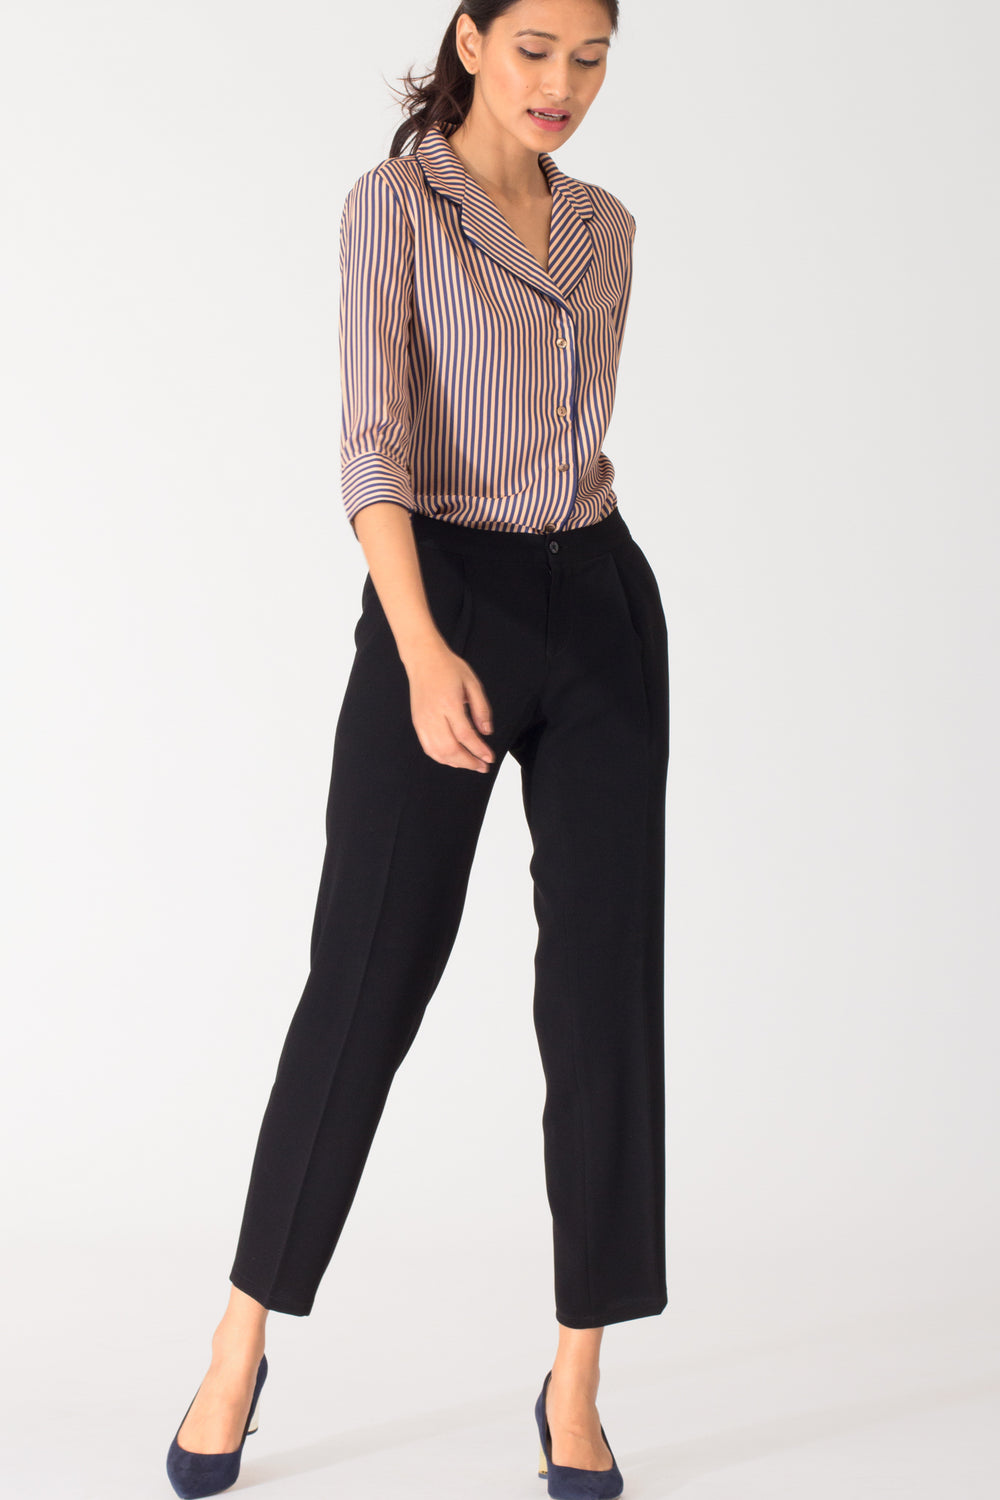 Cotton Ladies Black Formal Pant Pattern  Plain Feature  AntiWrinkle  Breath Taking Look Easily Washable at Rs 450  in Pune